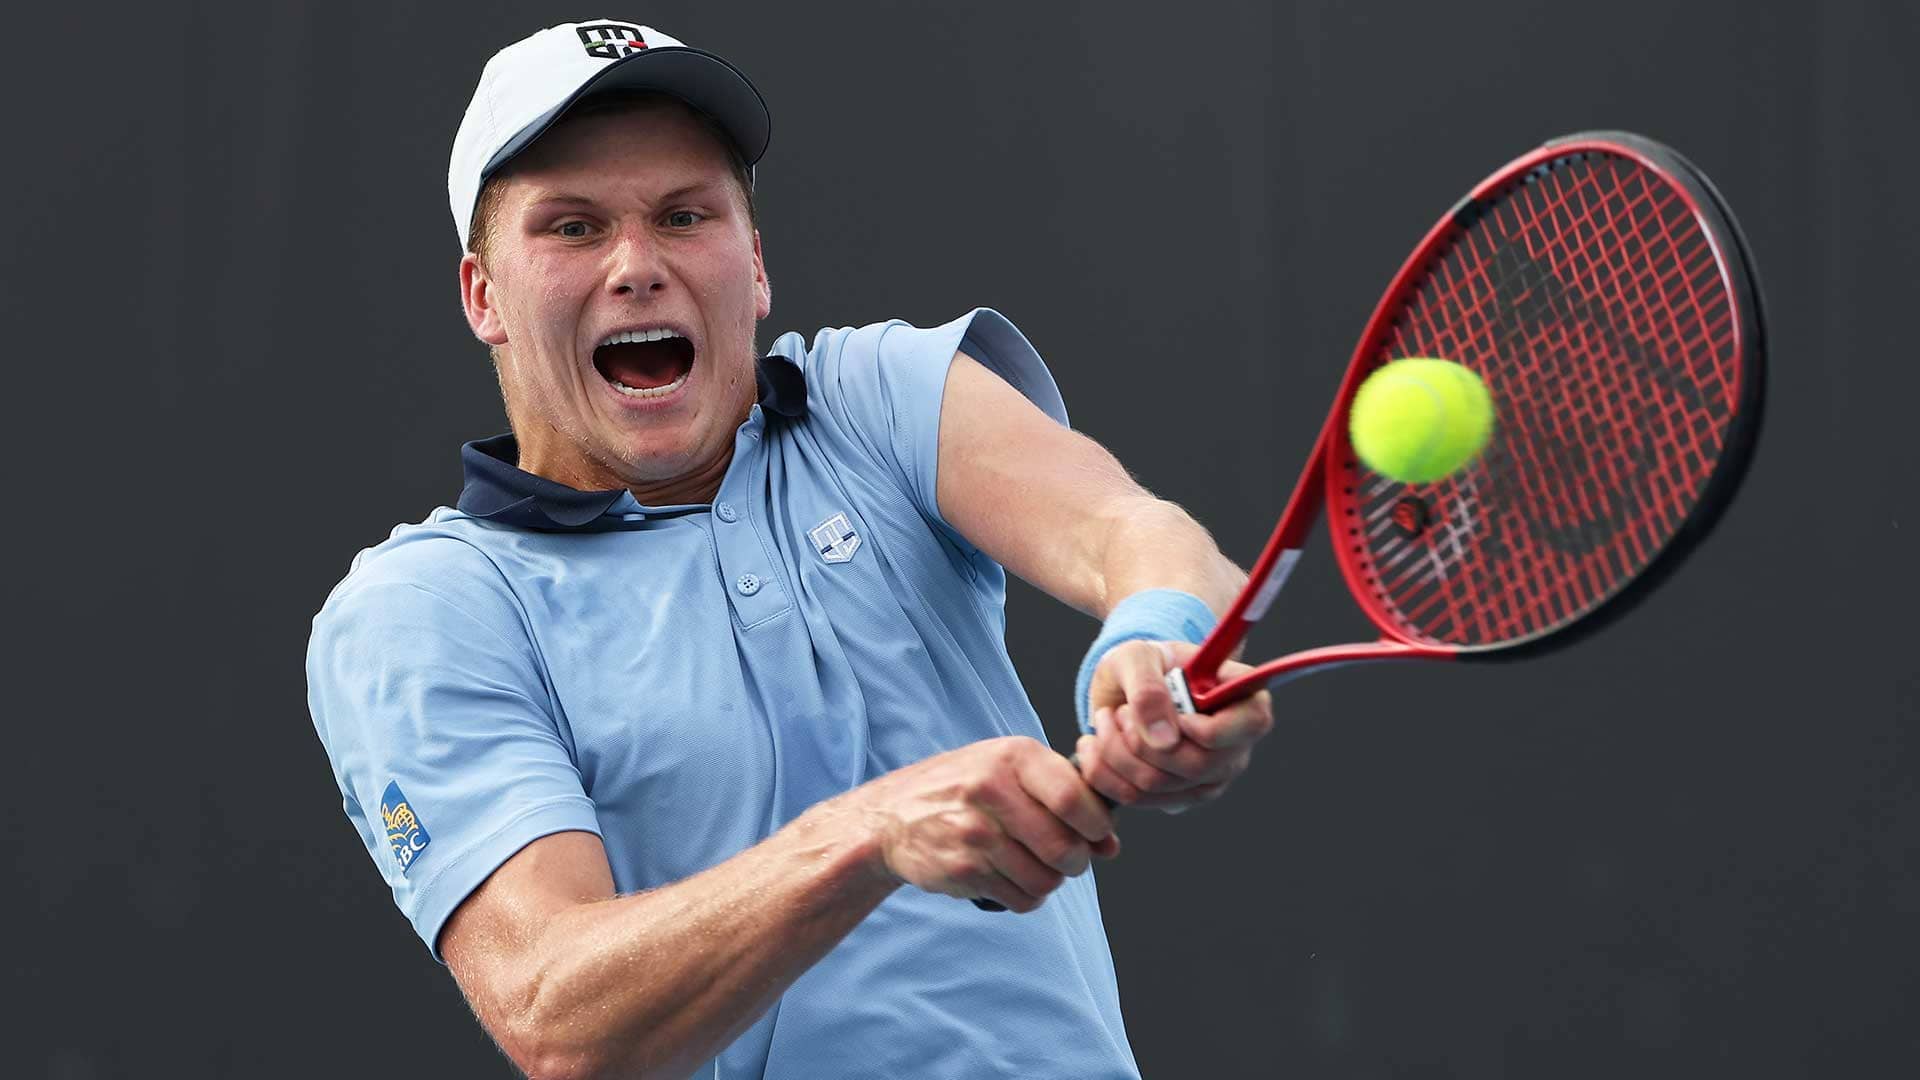 Jenson Brooksby is making his debut at the Australian Open.